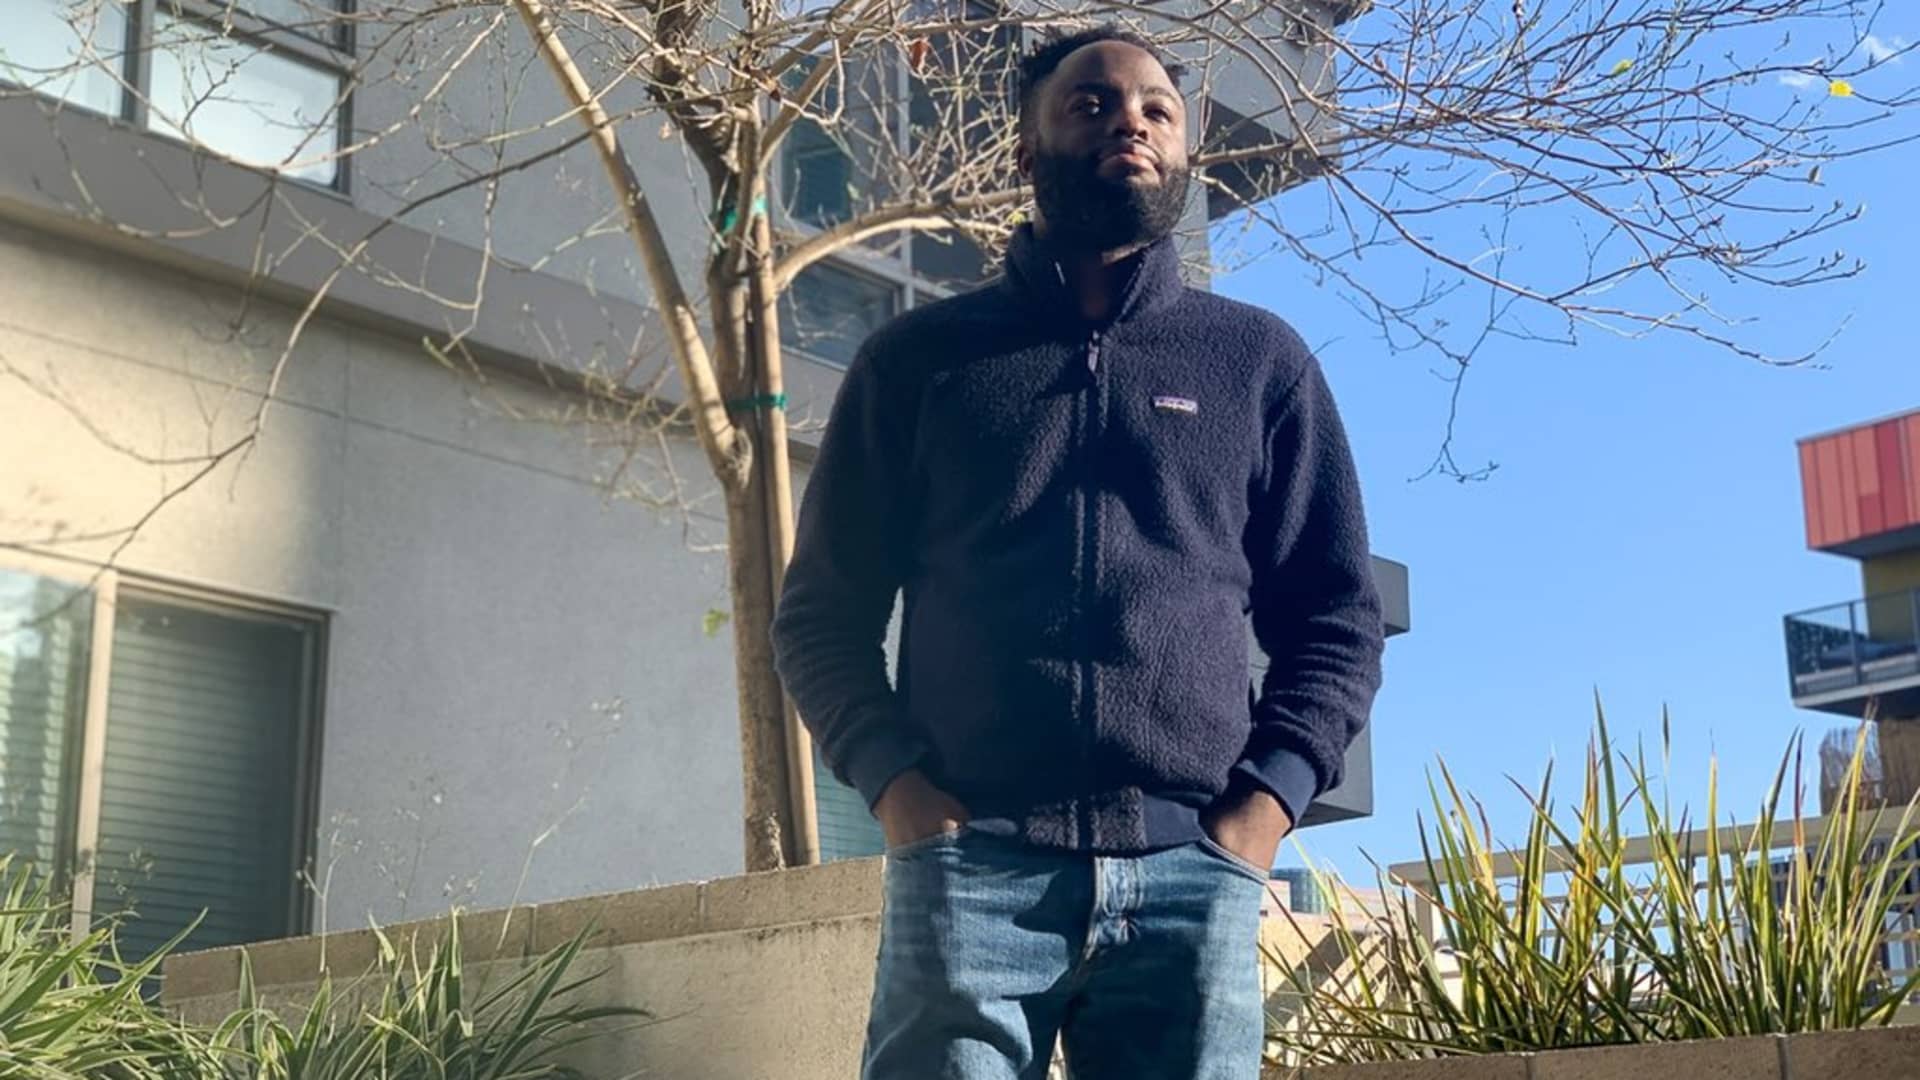 TikTok product operations lead Josh Ogundu has grown in popularity as tech workers relate to his videos that take satire to the reality of working in tech.